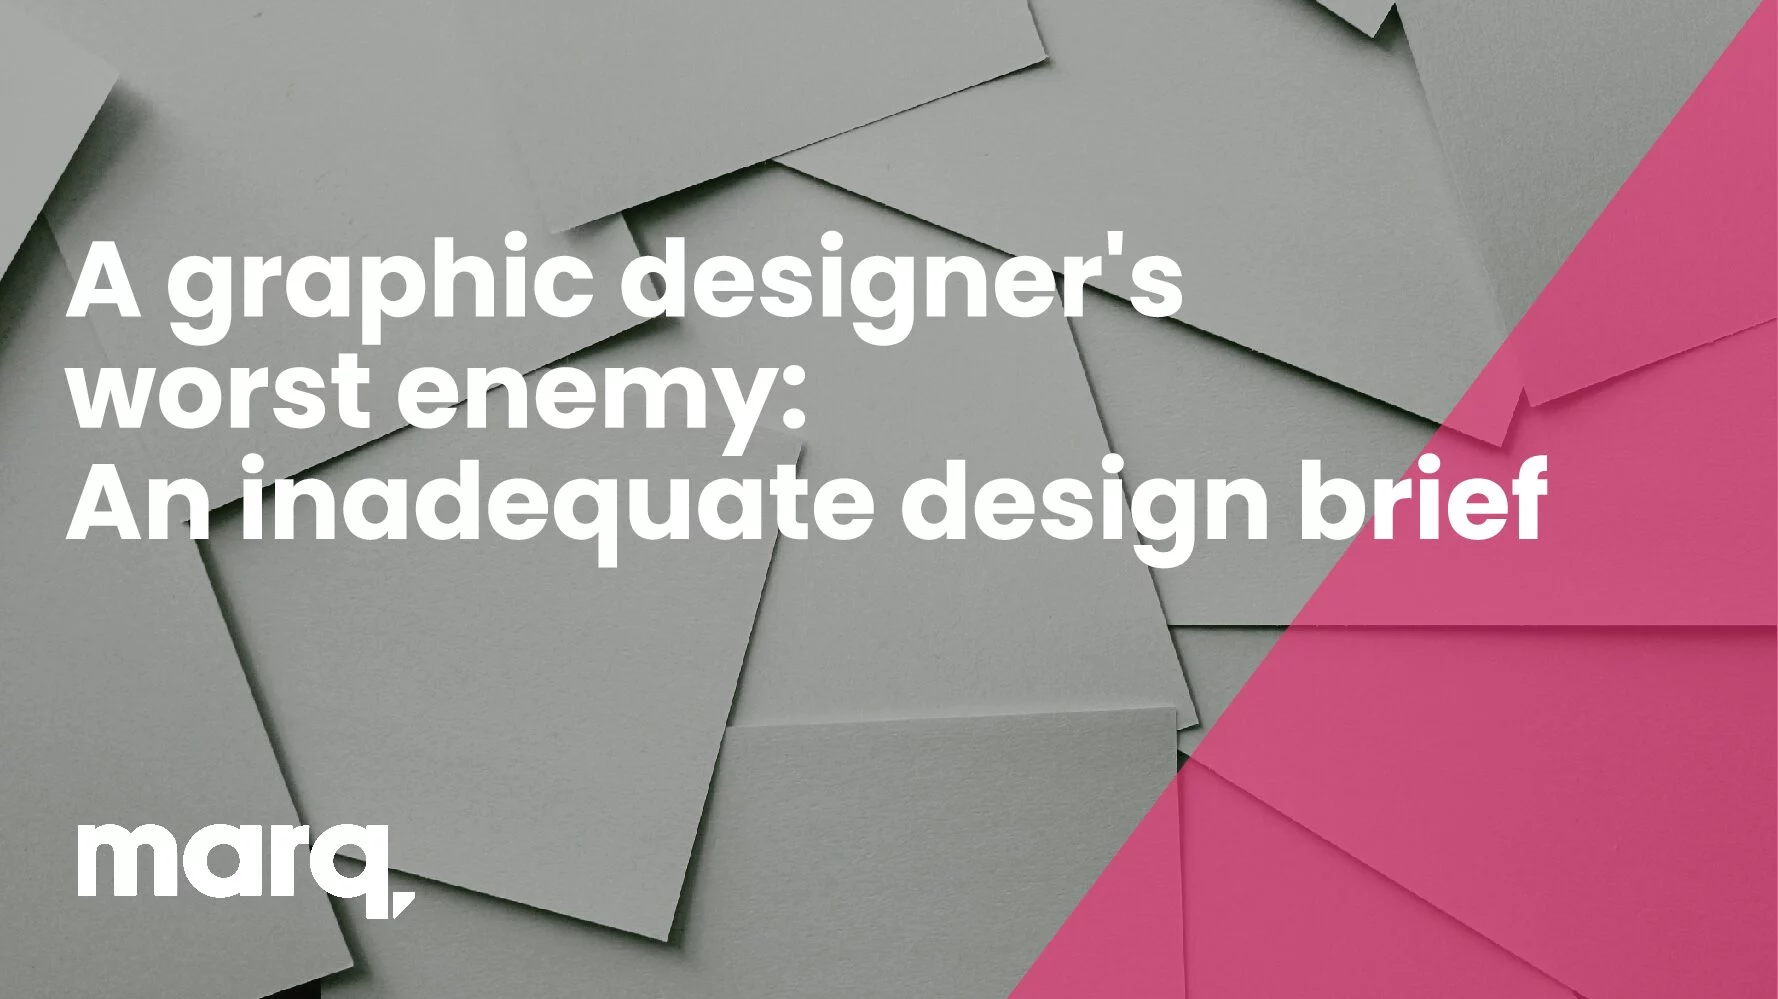 An inadequate design brief